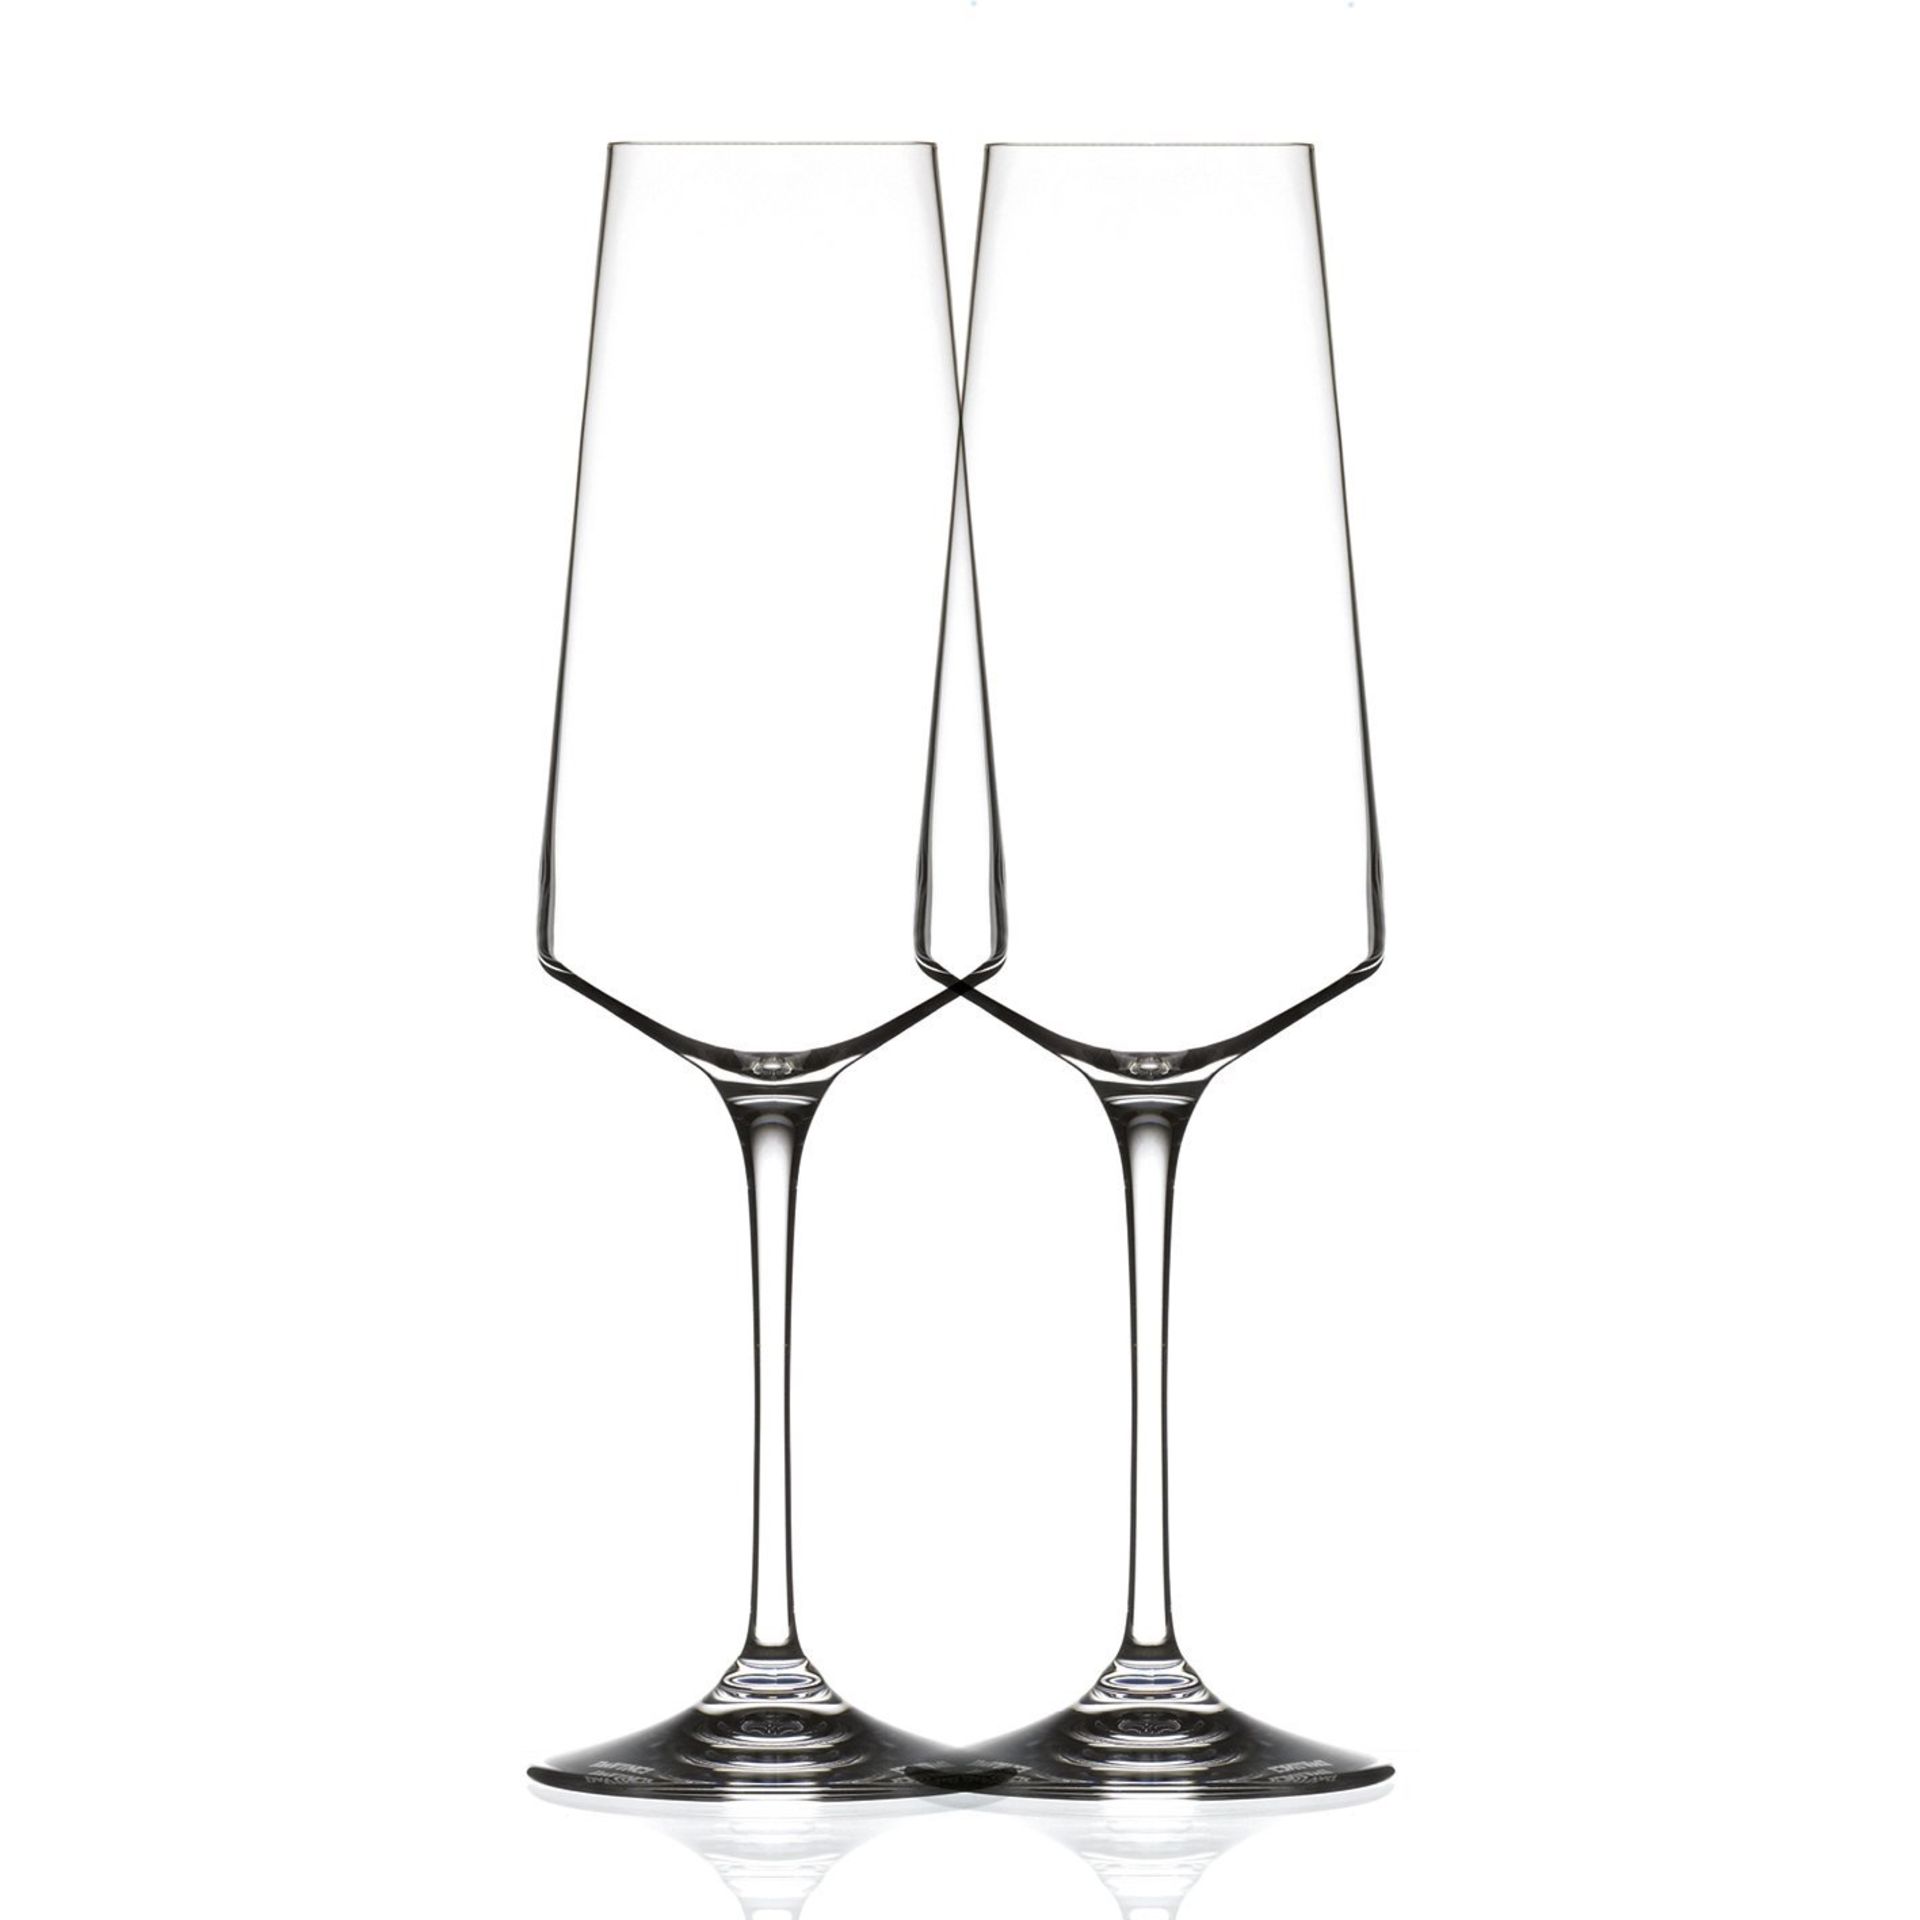 V *TRADE QTY* Brand New Twin Pack of RCR Armonia Italian Crystal 35cl Champagne Flutes Amazon